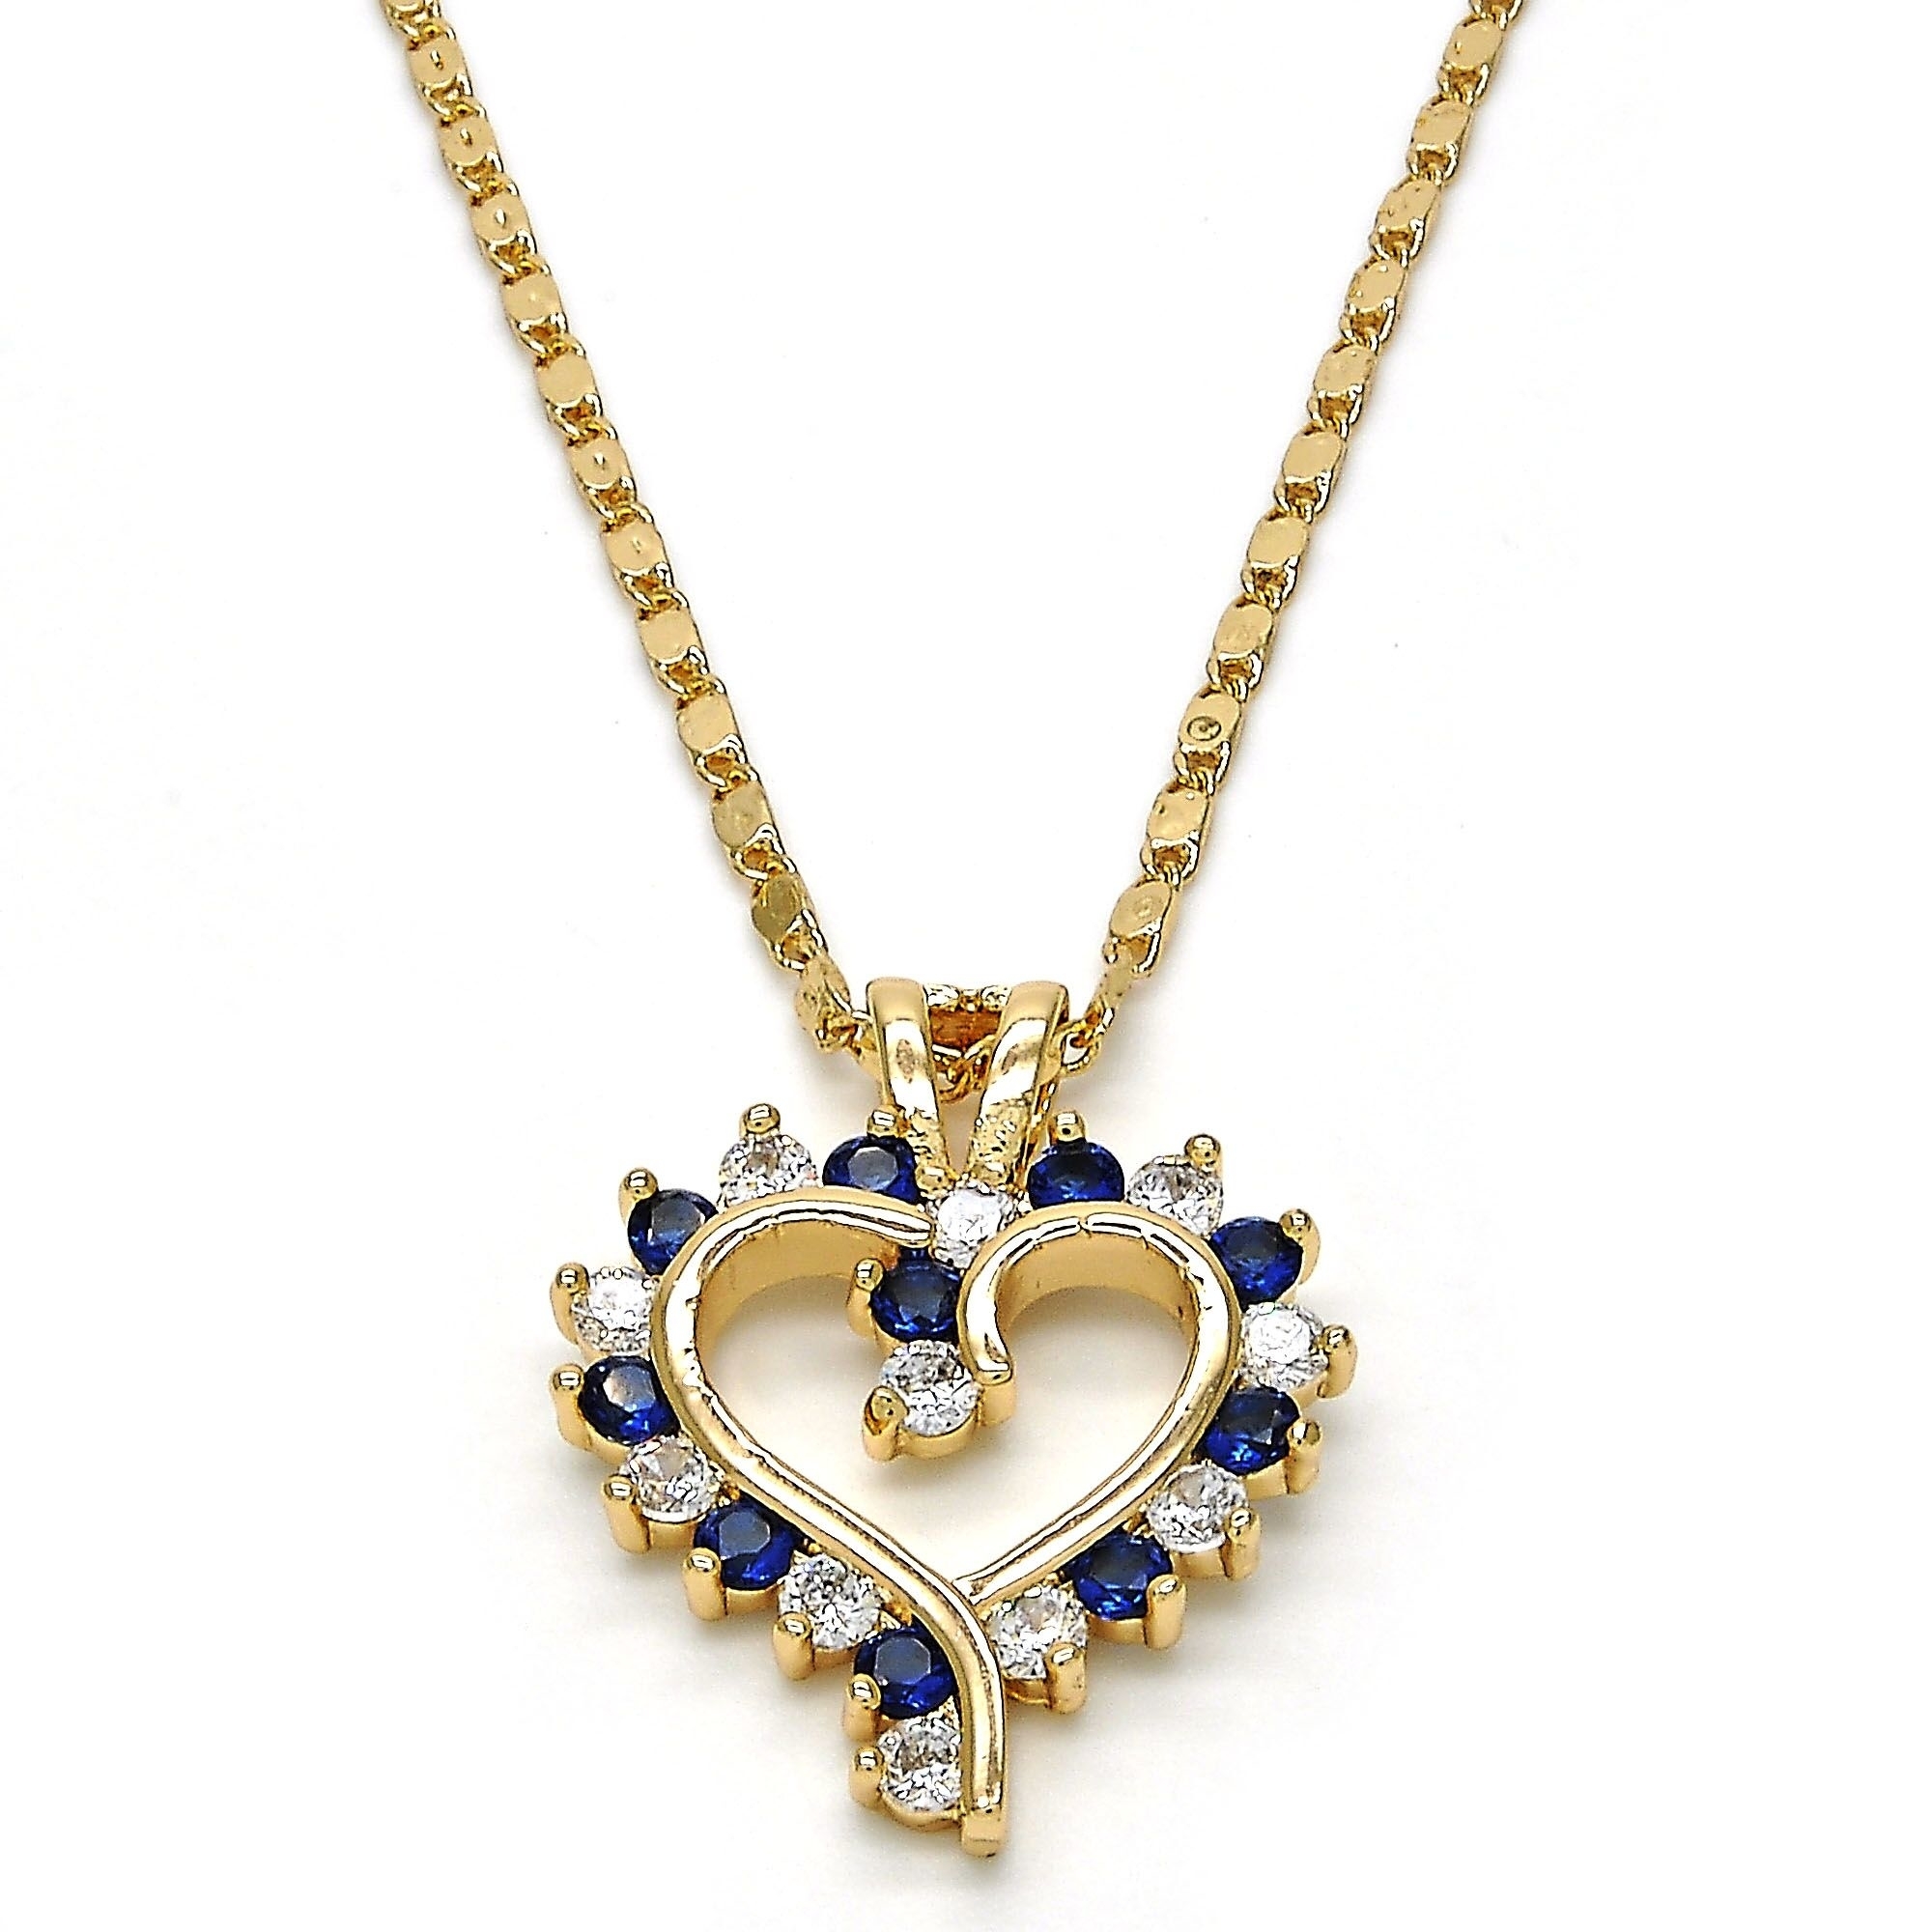 18K Gold Filled High Polish Finsh Fancy Necklace, Heart Design, With Micro Pava Setting